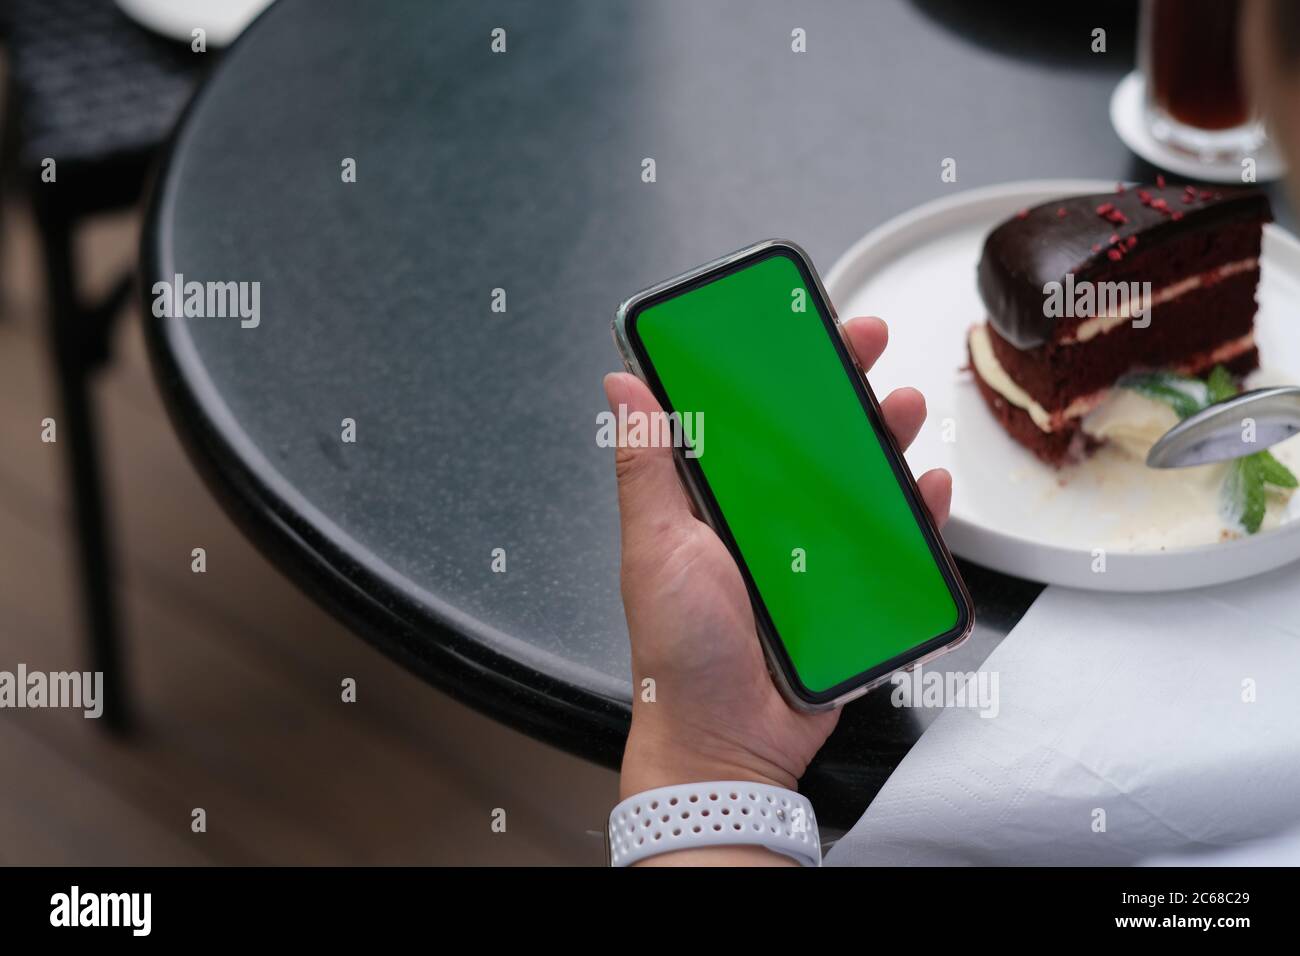 over shoulder of people holding green screen smartphone. blurred chocolate cake on black table. Stock Photo